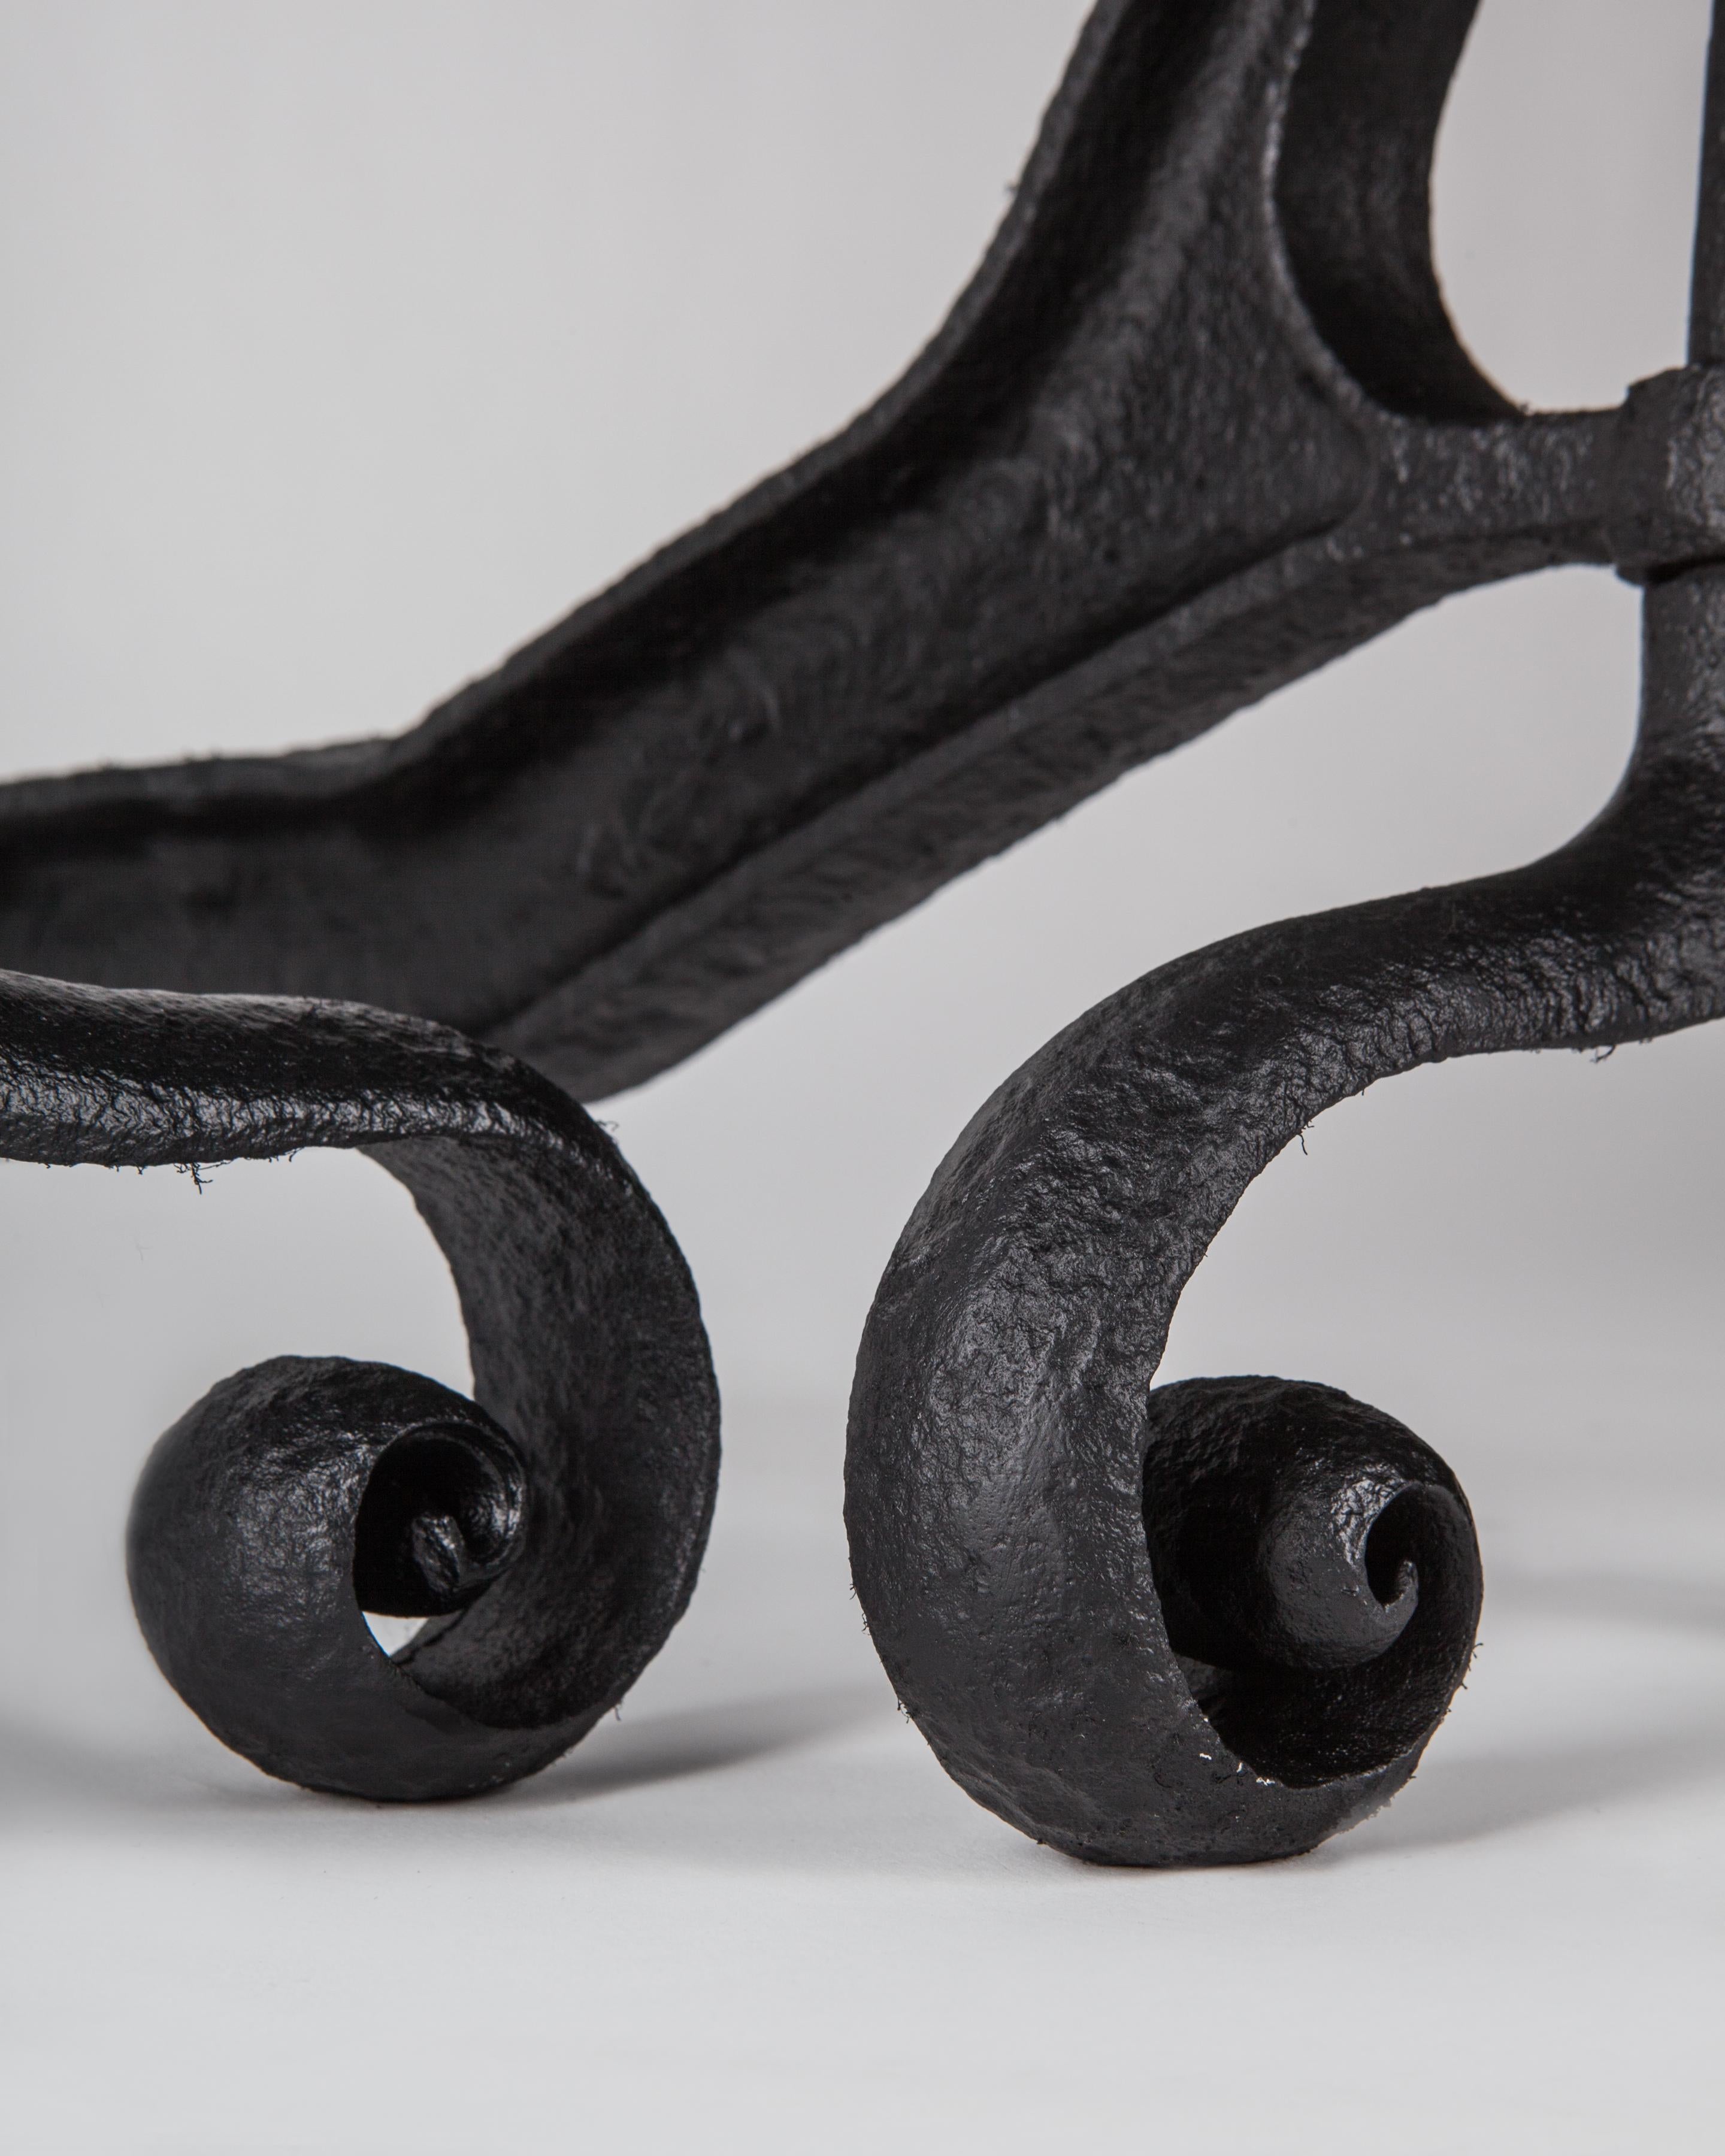 Wrought Iron Folk Art Industrial Forged and Blackened Iron Andirons with Scroll Feet, c. 1940 For Sale